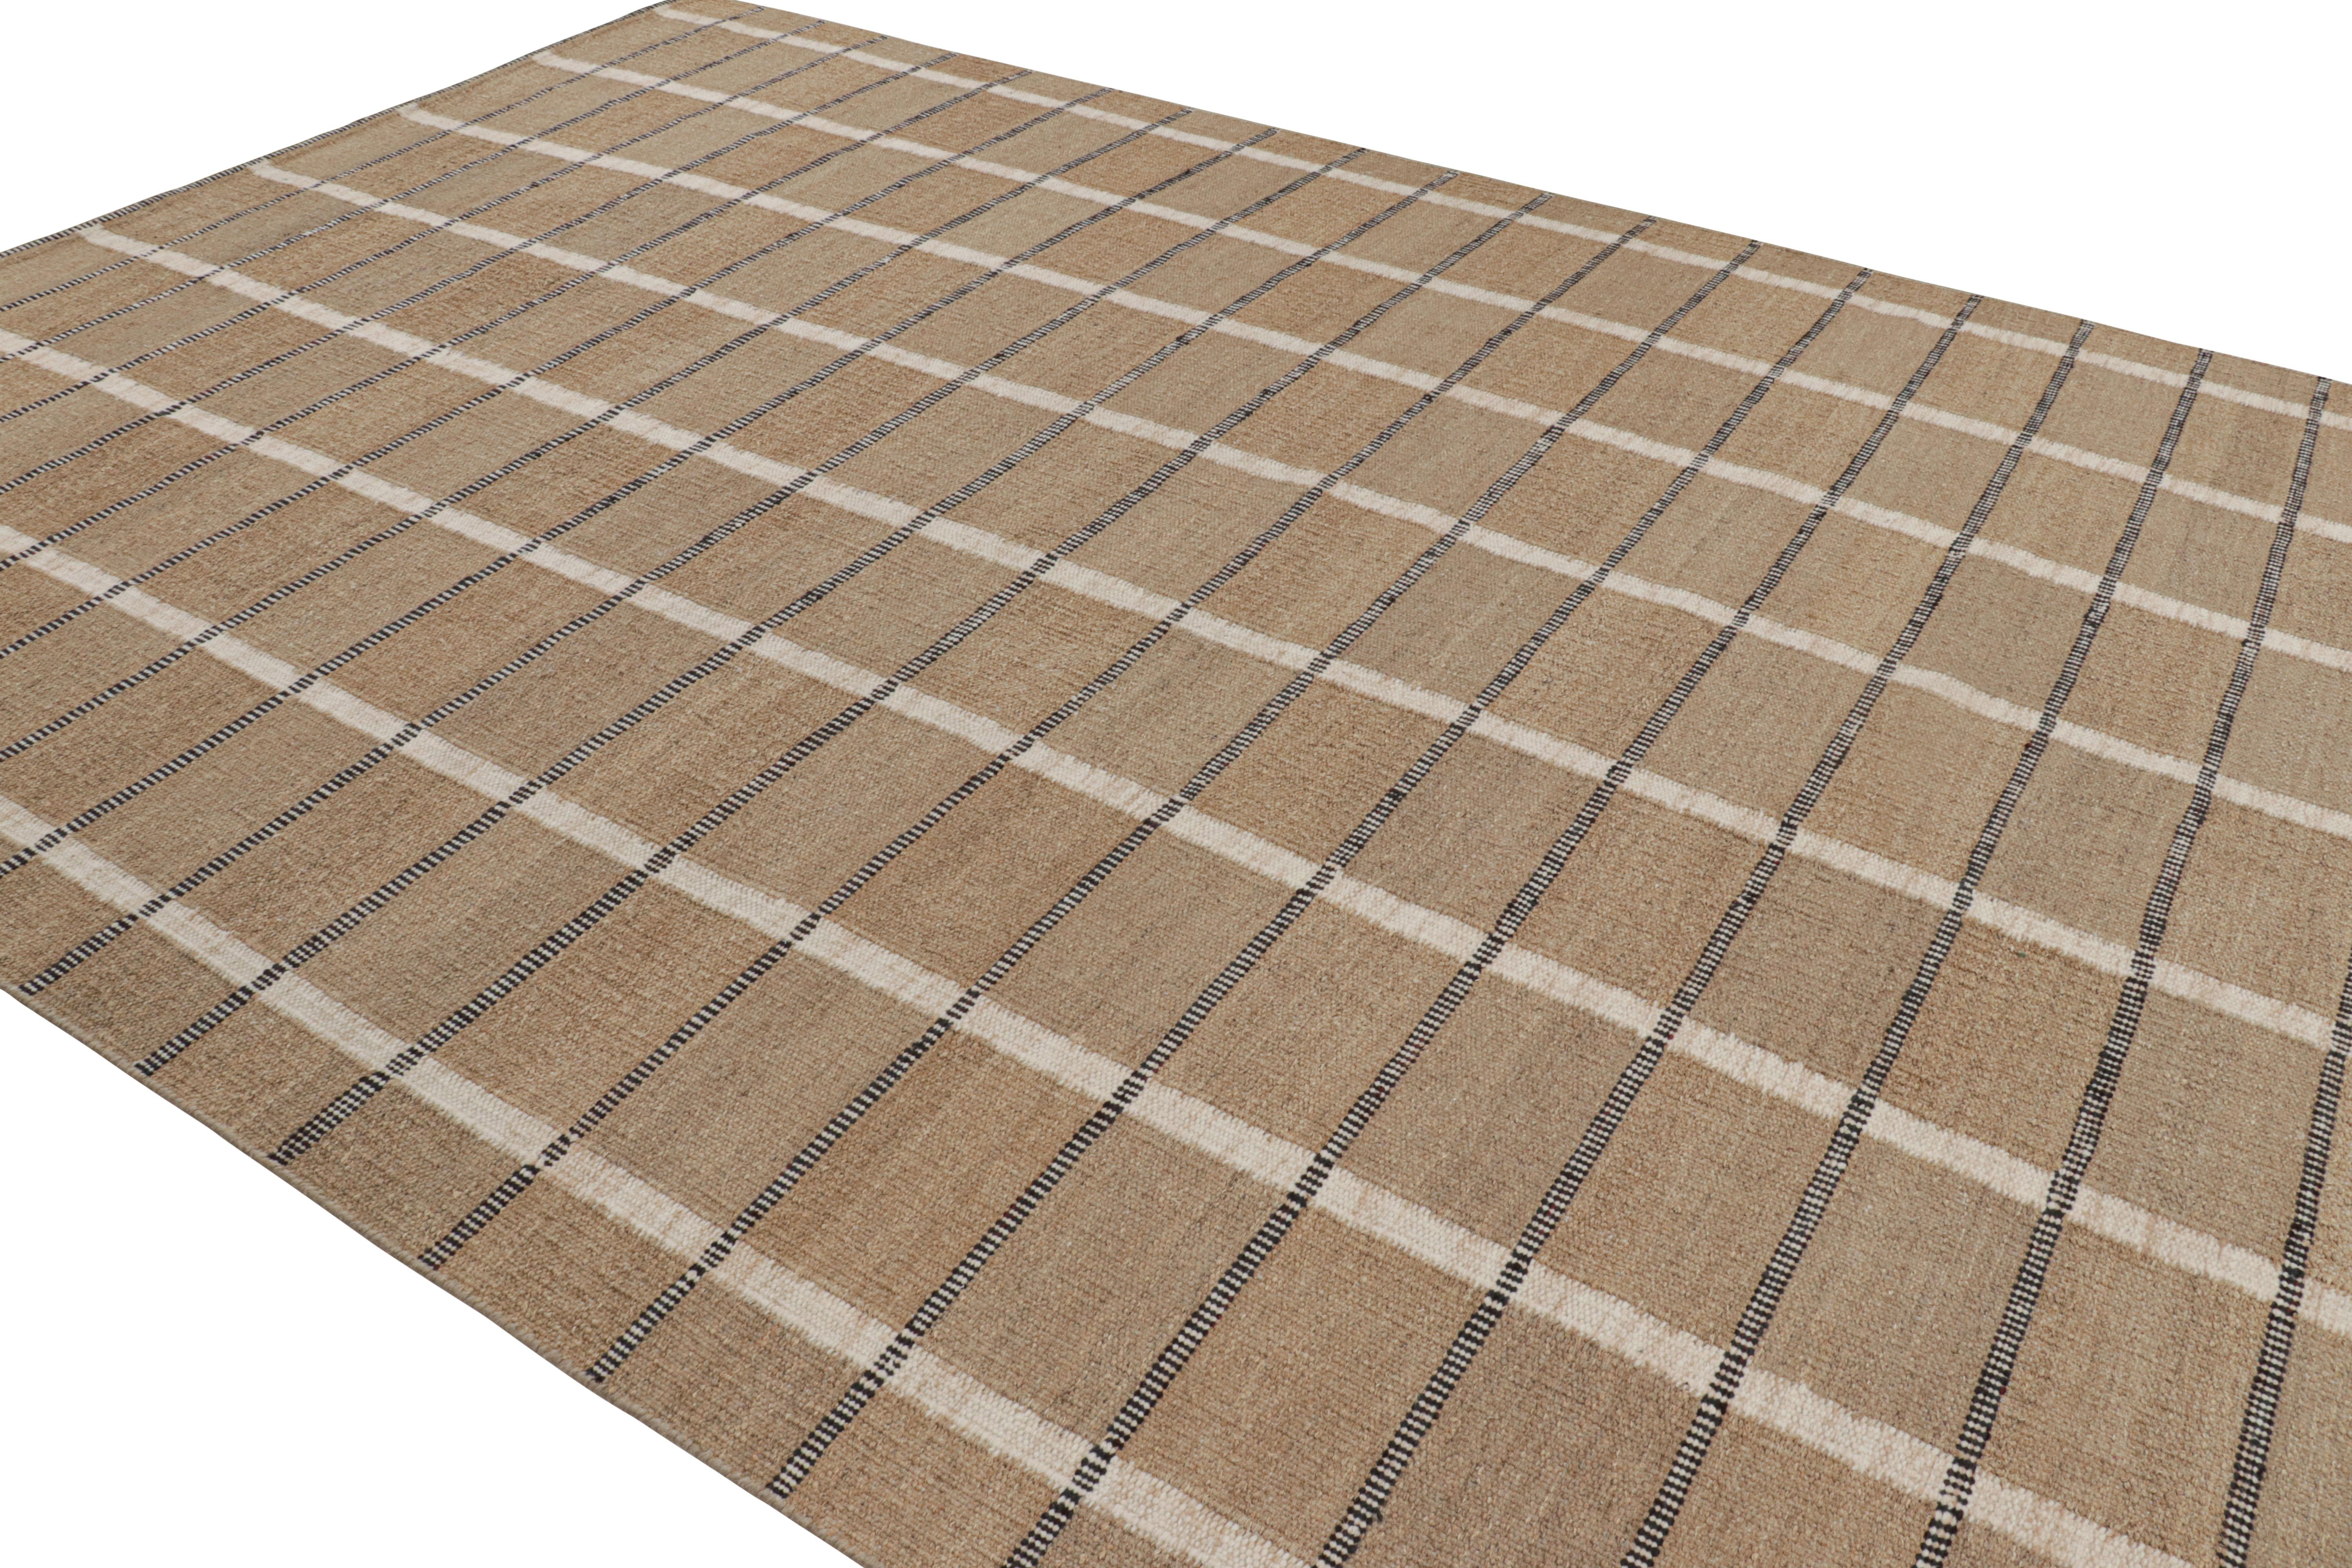 Indian Rug & Kilim’s Scandinavian Style Rug in Beige-Brown with White and Blue Stripes For Sale